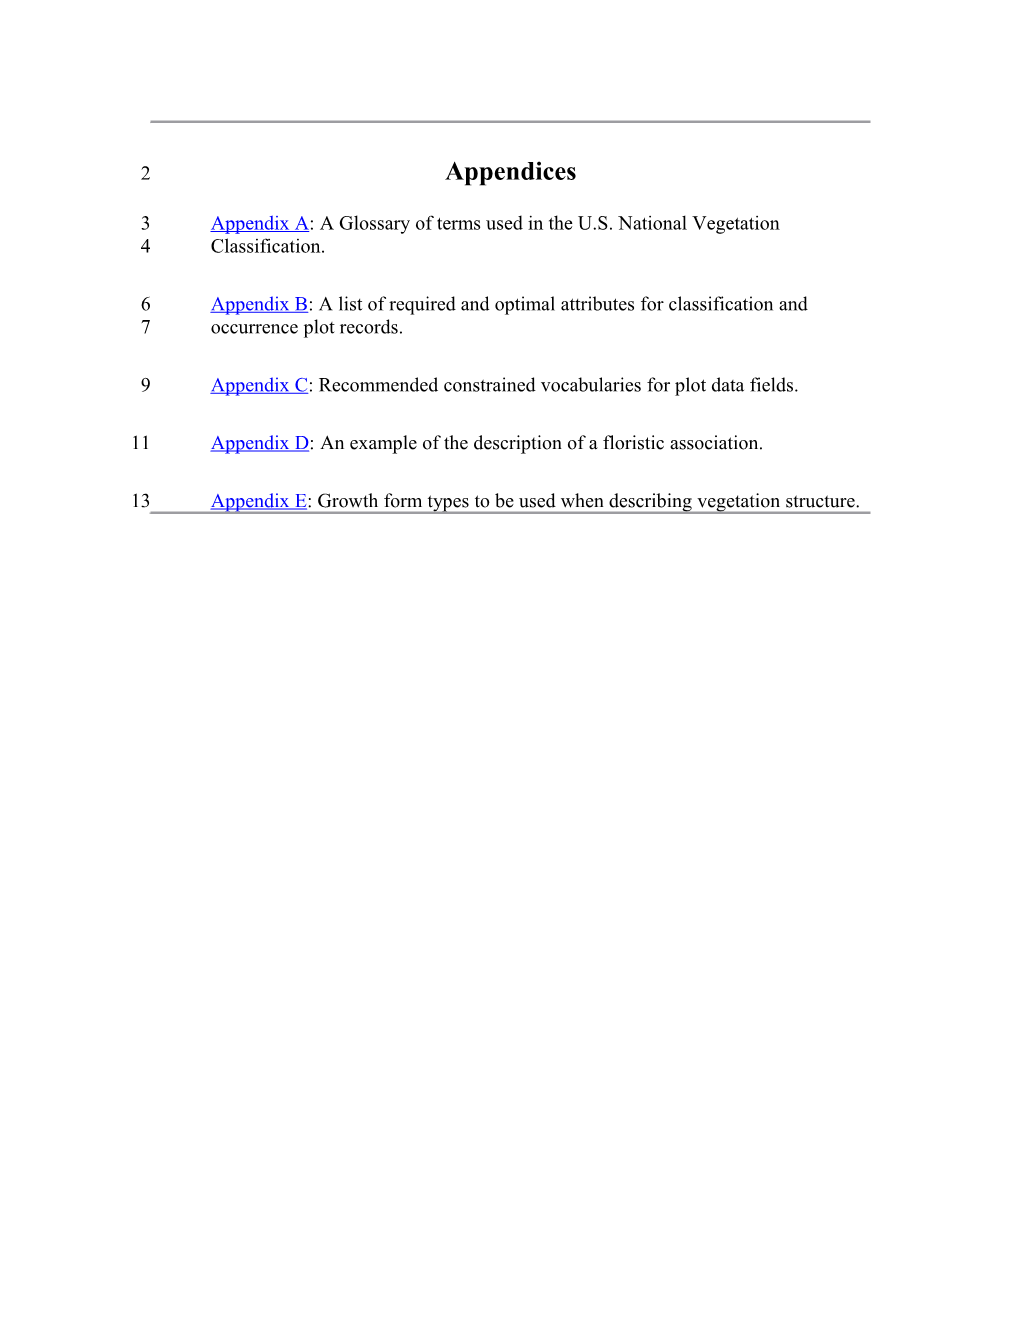 Appendix A: a Glossary of Terms Used in the U.S. National Vegetation Classification